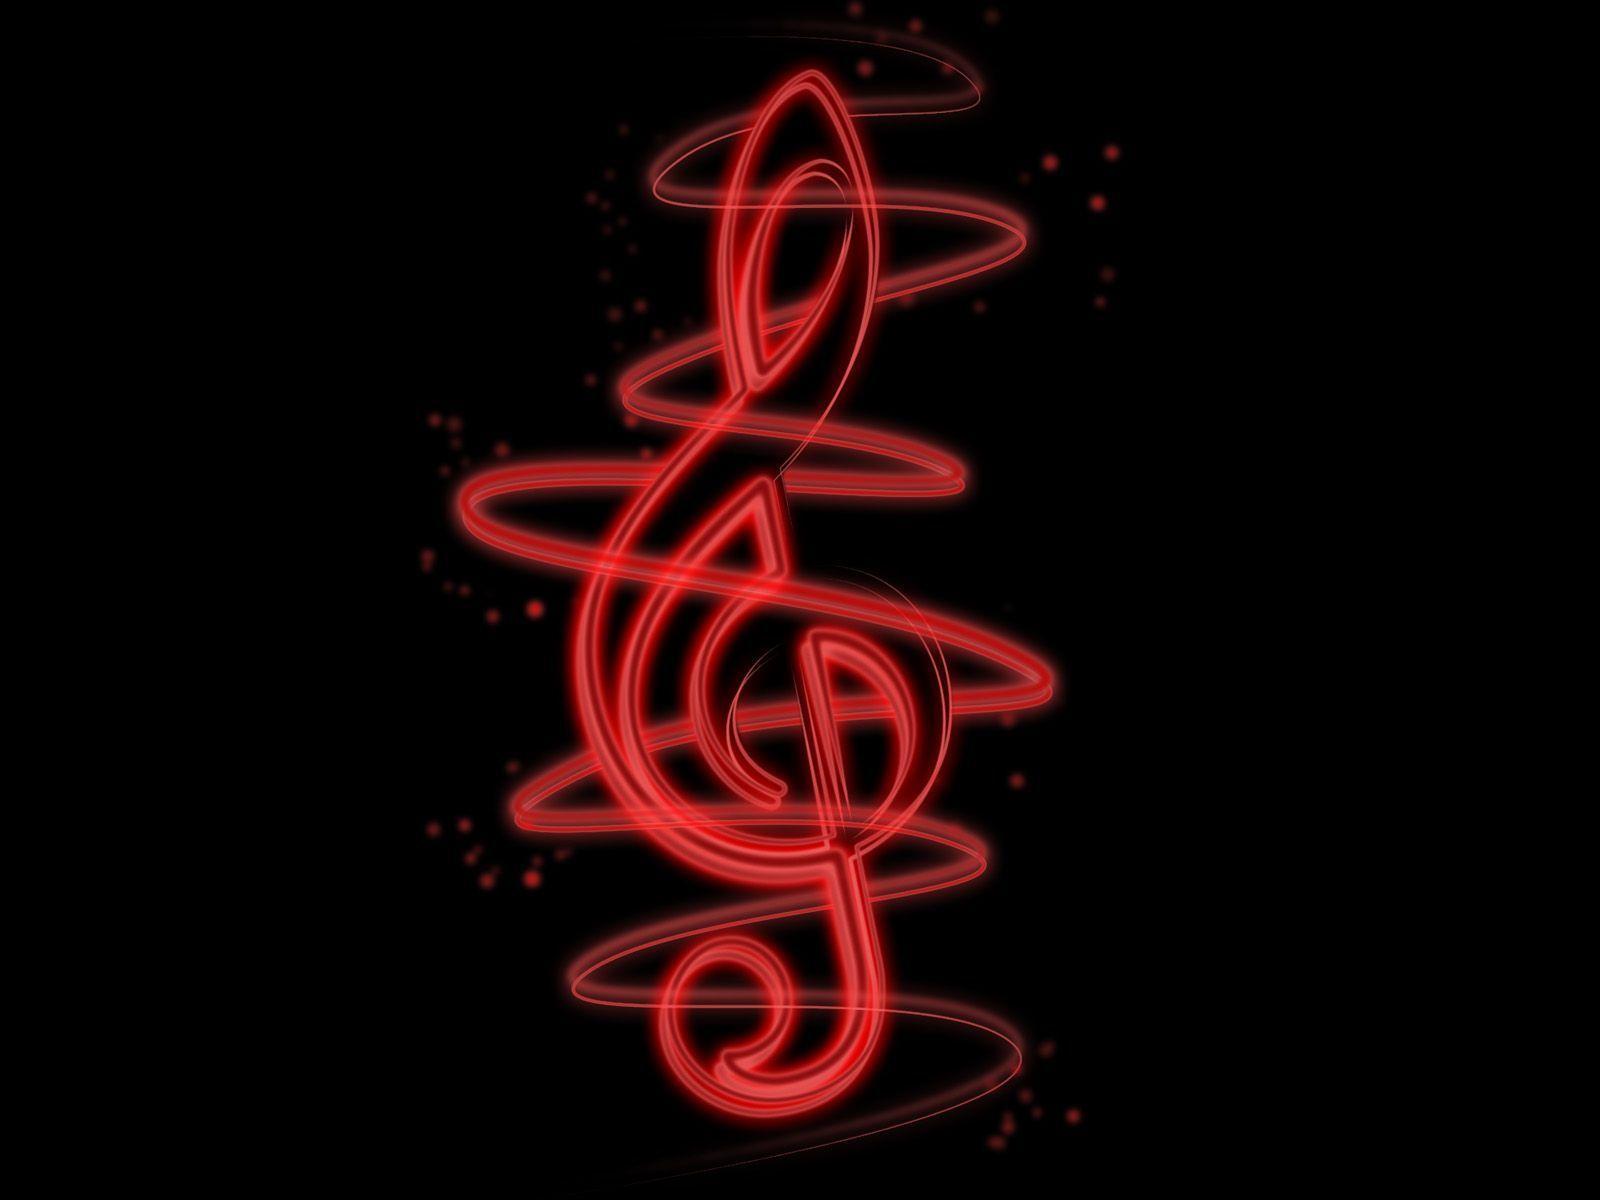 Wallpaper Treble clef. Red and Black Wallpaper